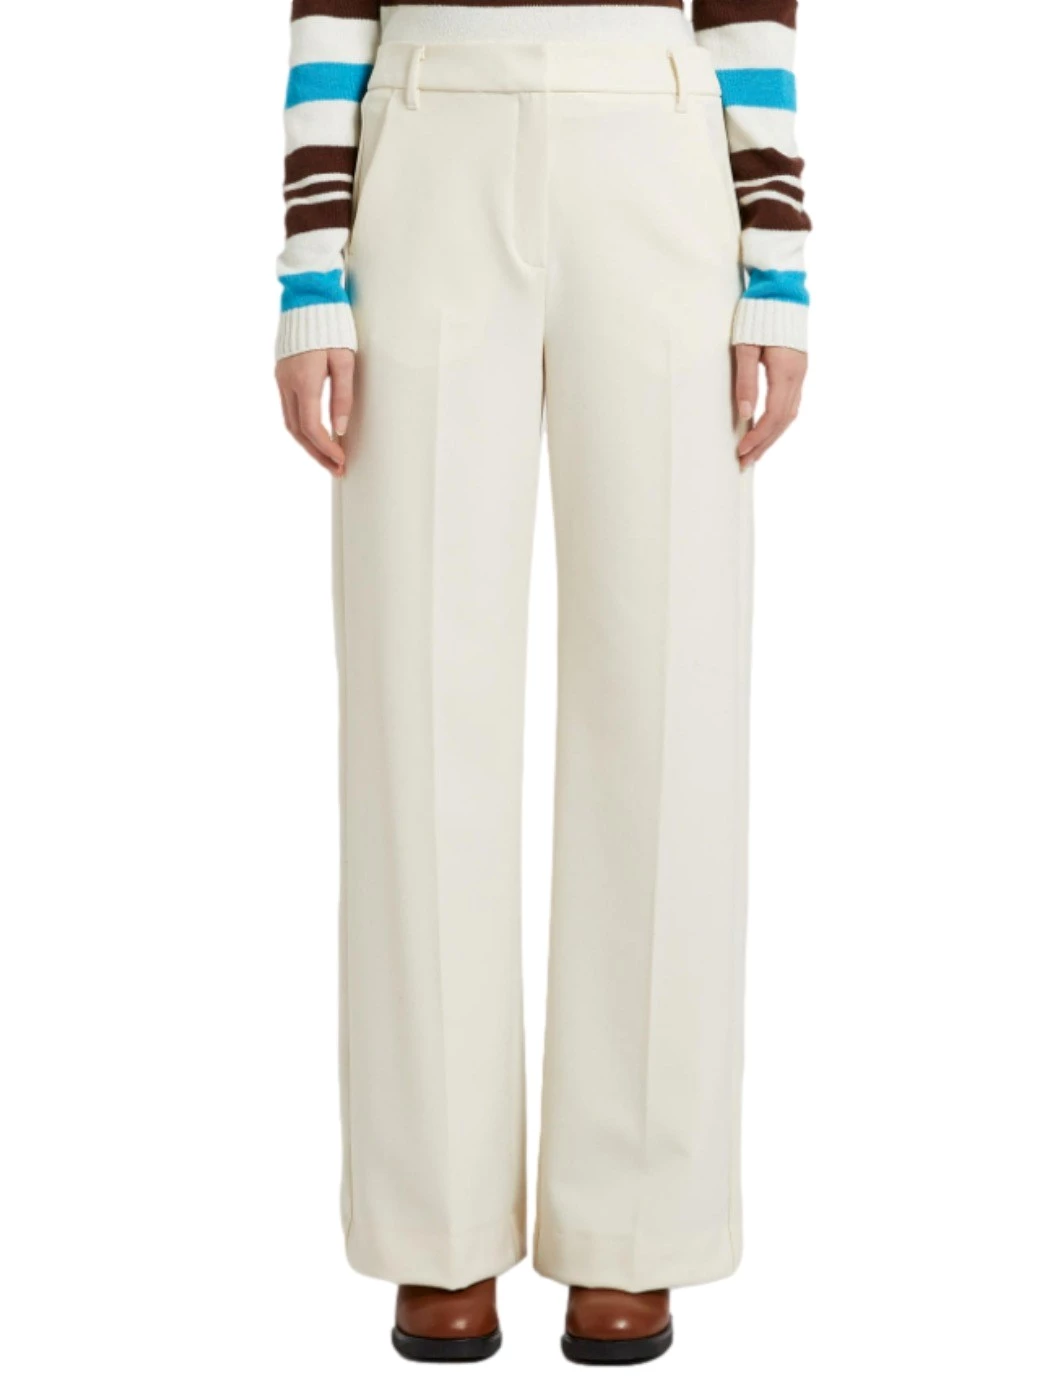 IBlues Trousers